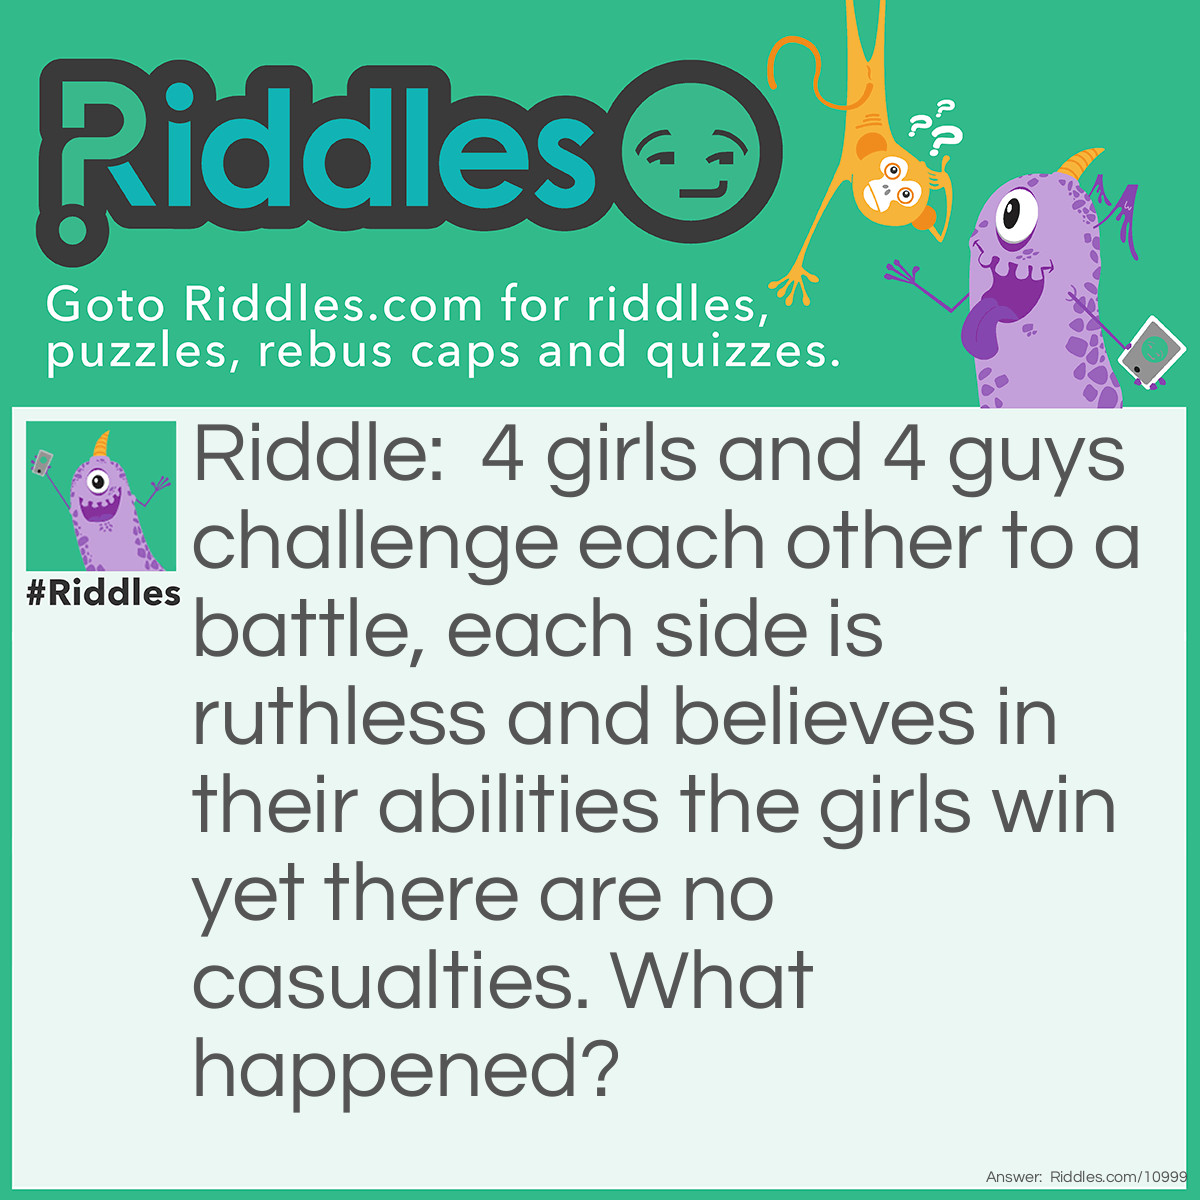 Riddle: 4 girls and 4 guys challenge each other to a battle, each side is ruthless and believes in their abilities the girls win yet there are no casualties. What happened? Answer: It was a singing battle.